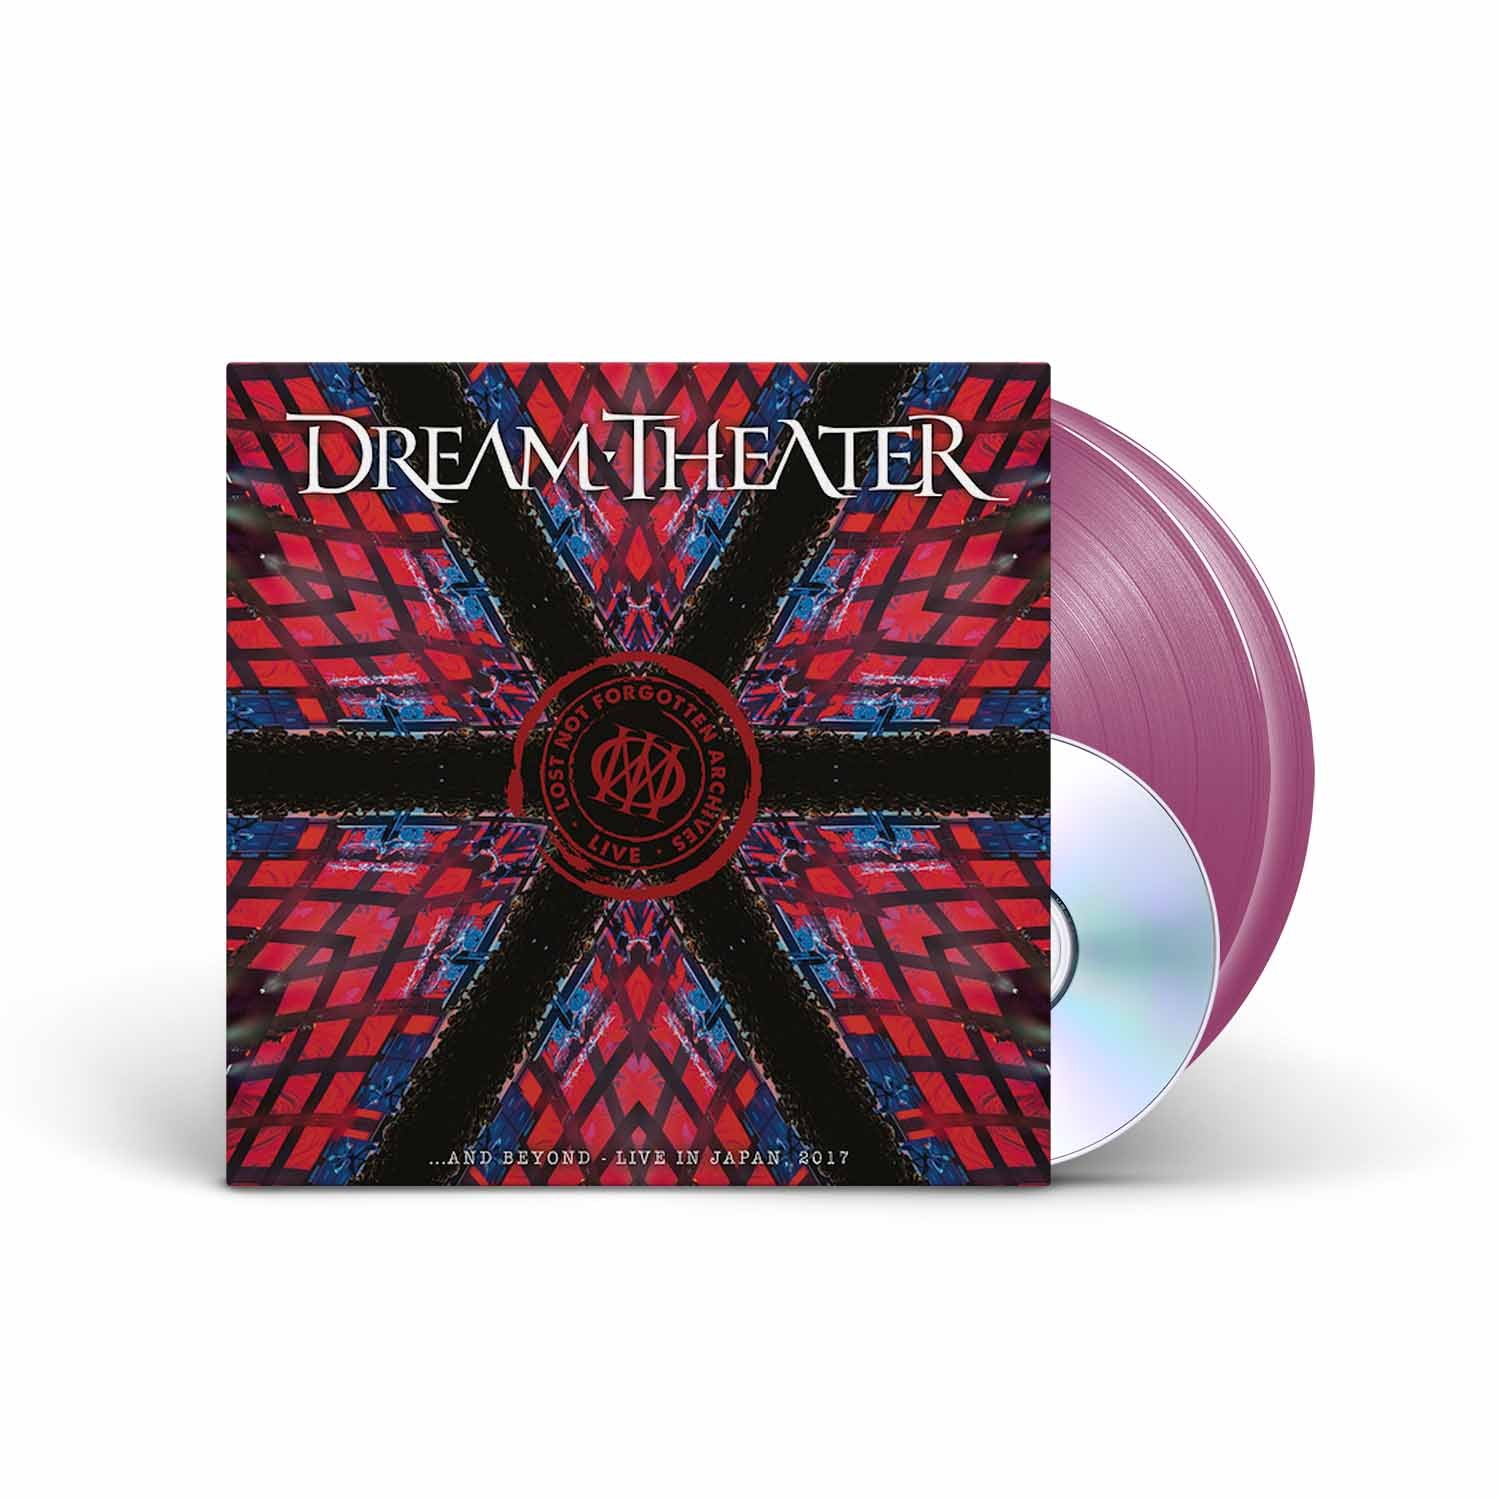 DREAM THEATER - Lost Not Forgotten Archives: ...and Beyond - Live in Japan, 2017 - Orchid 2xLP + CD